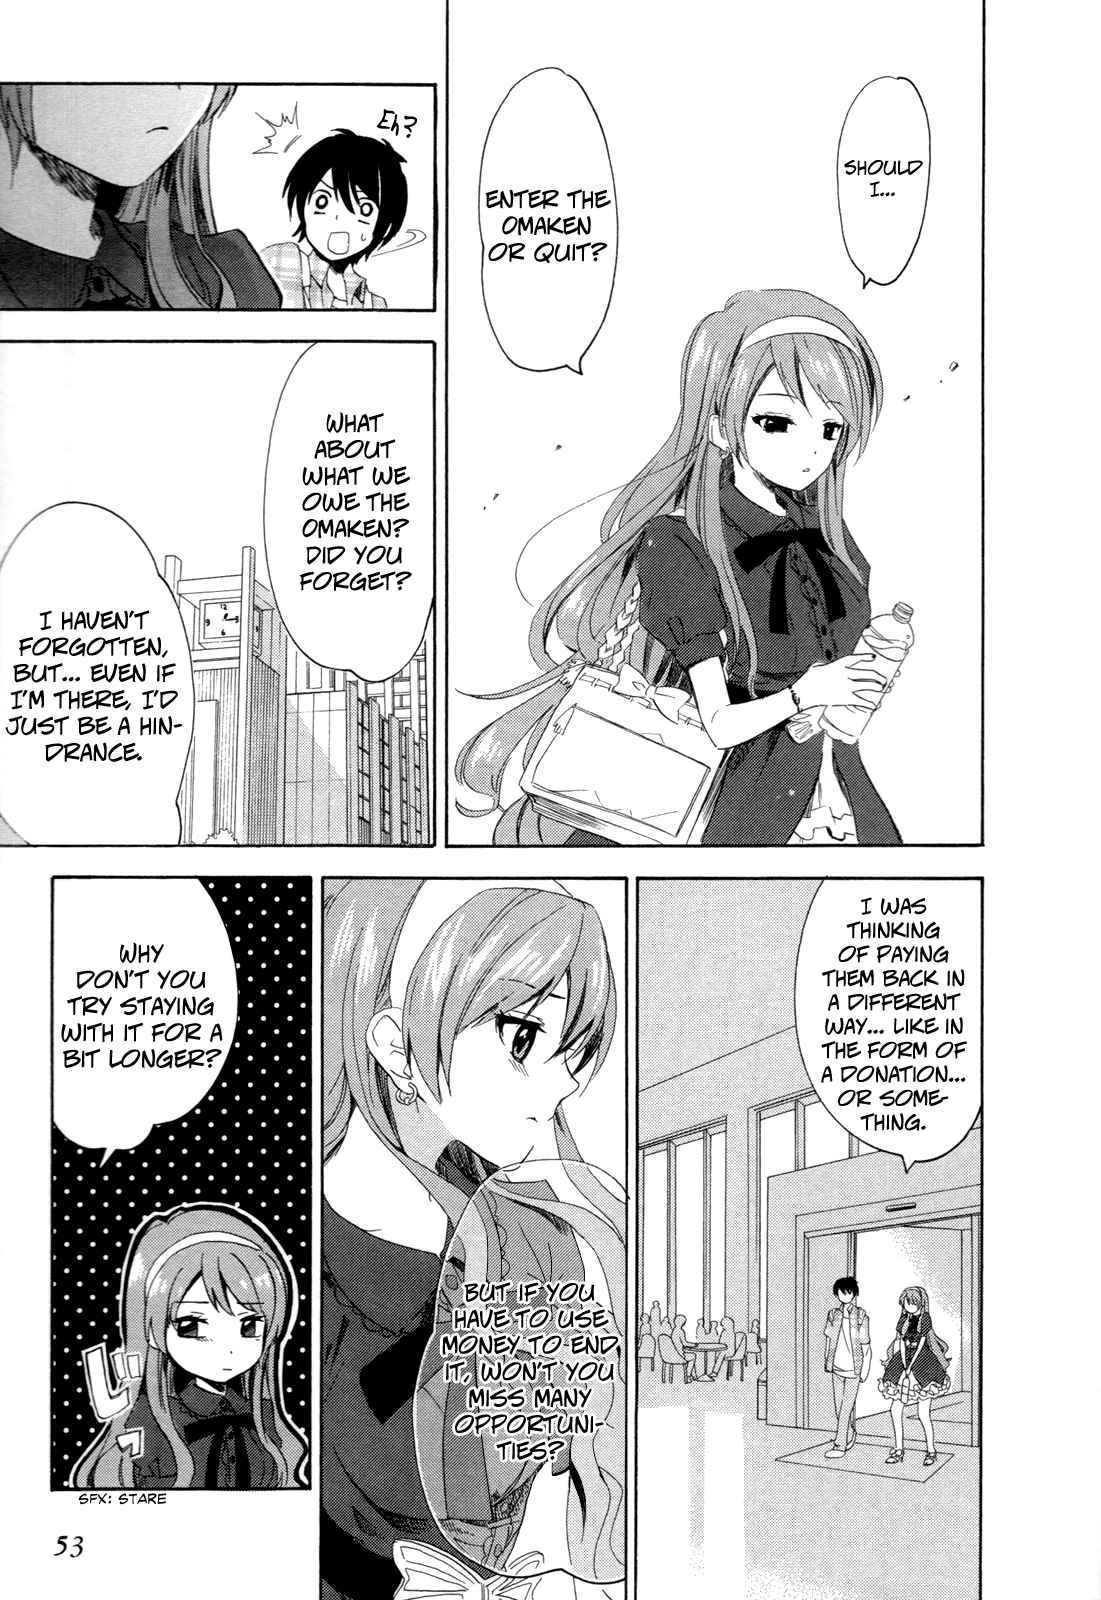 Golden Time Vol. 2 Ch. 8 She's a Fool, but not a Dancing Fool